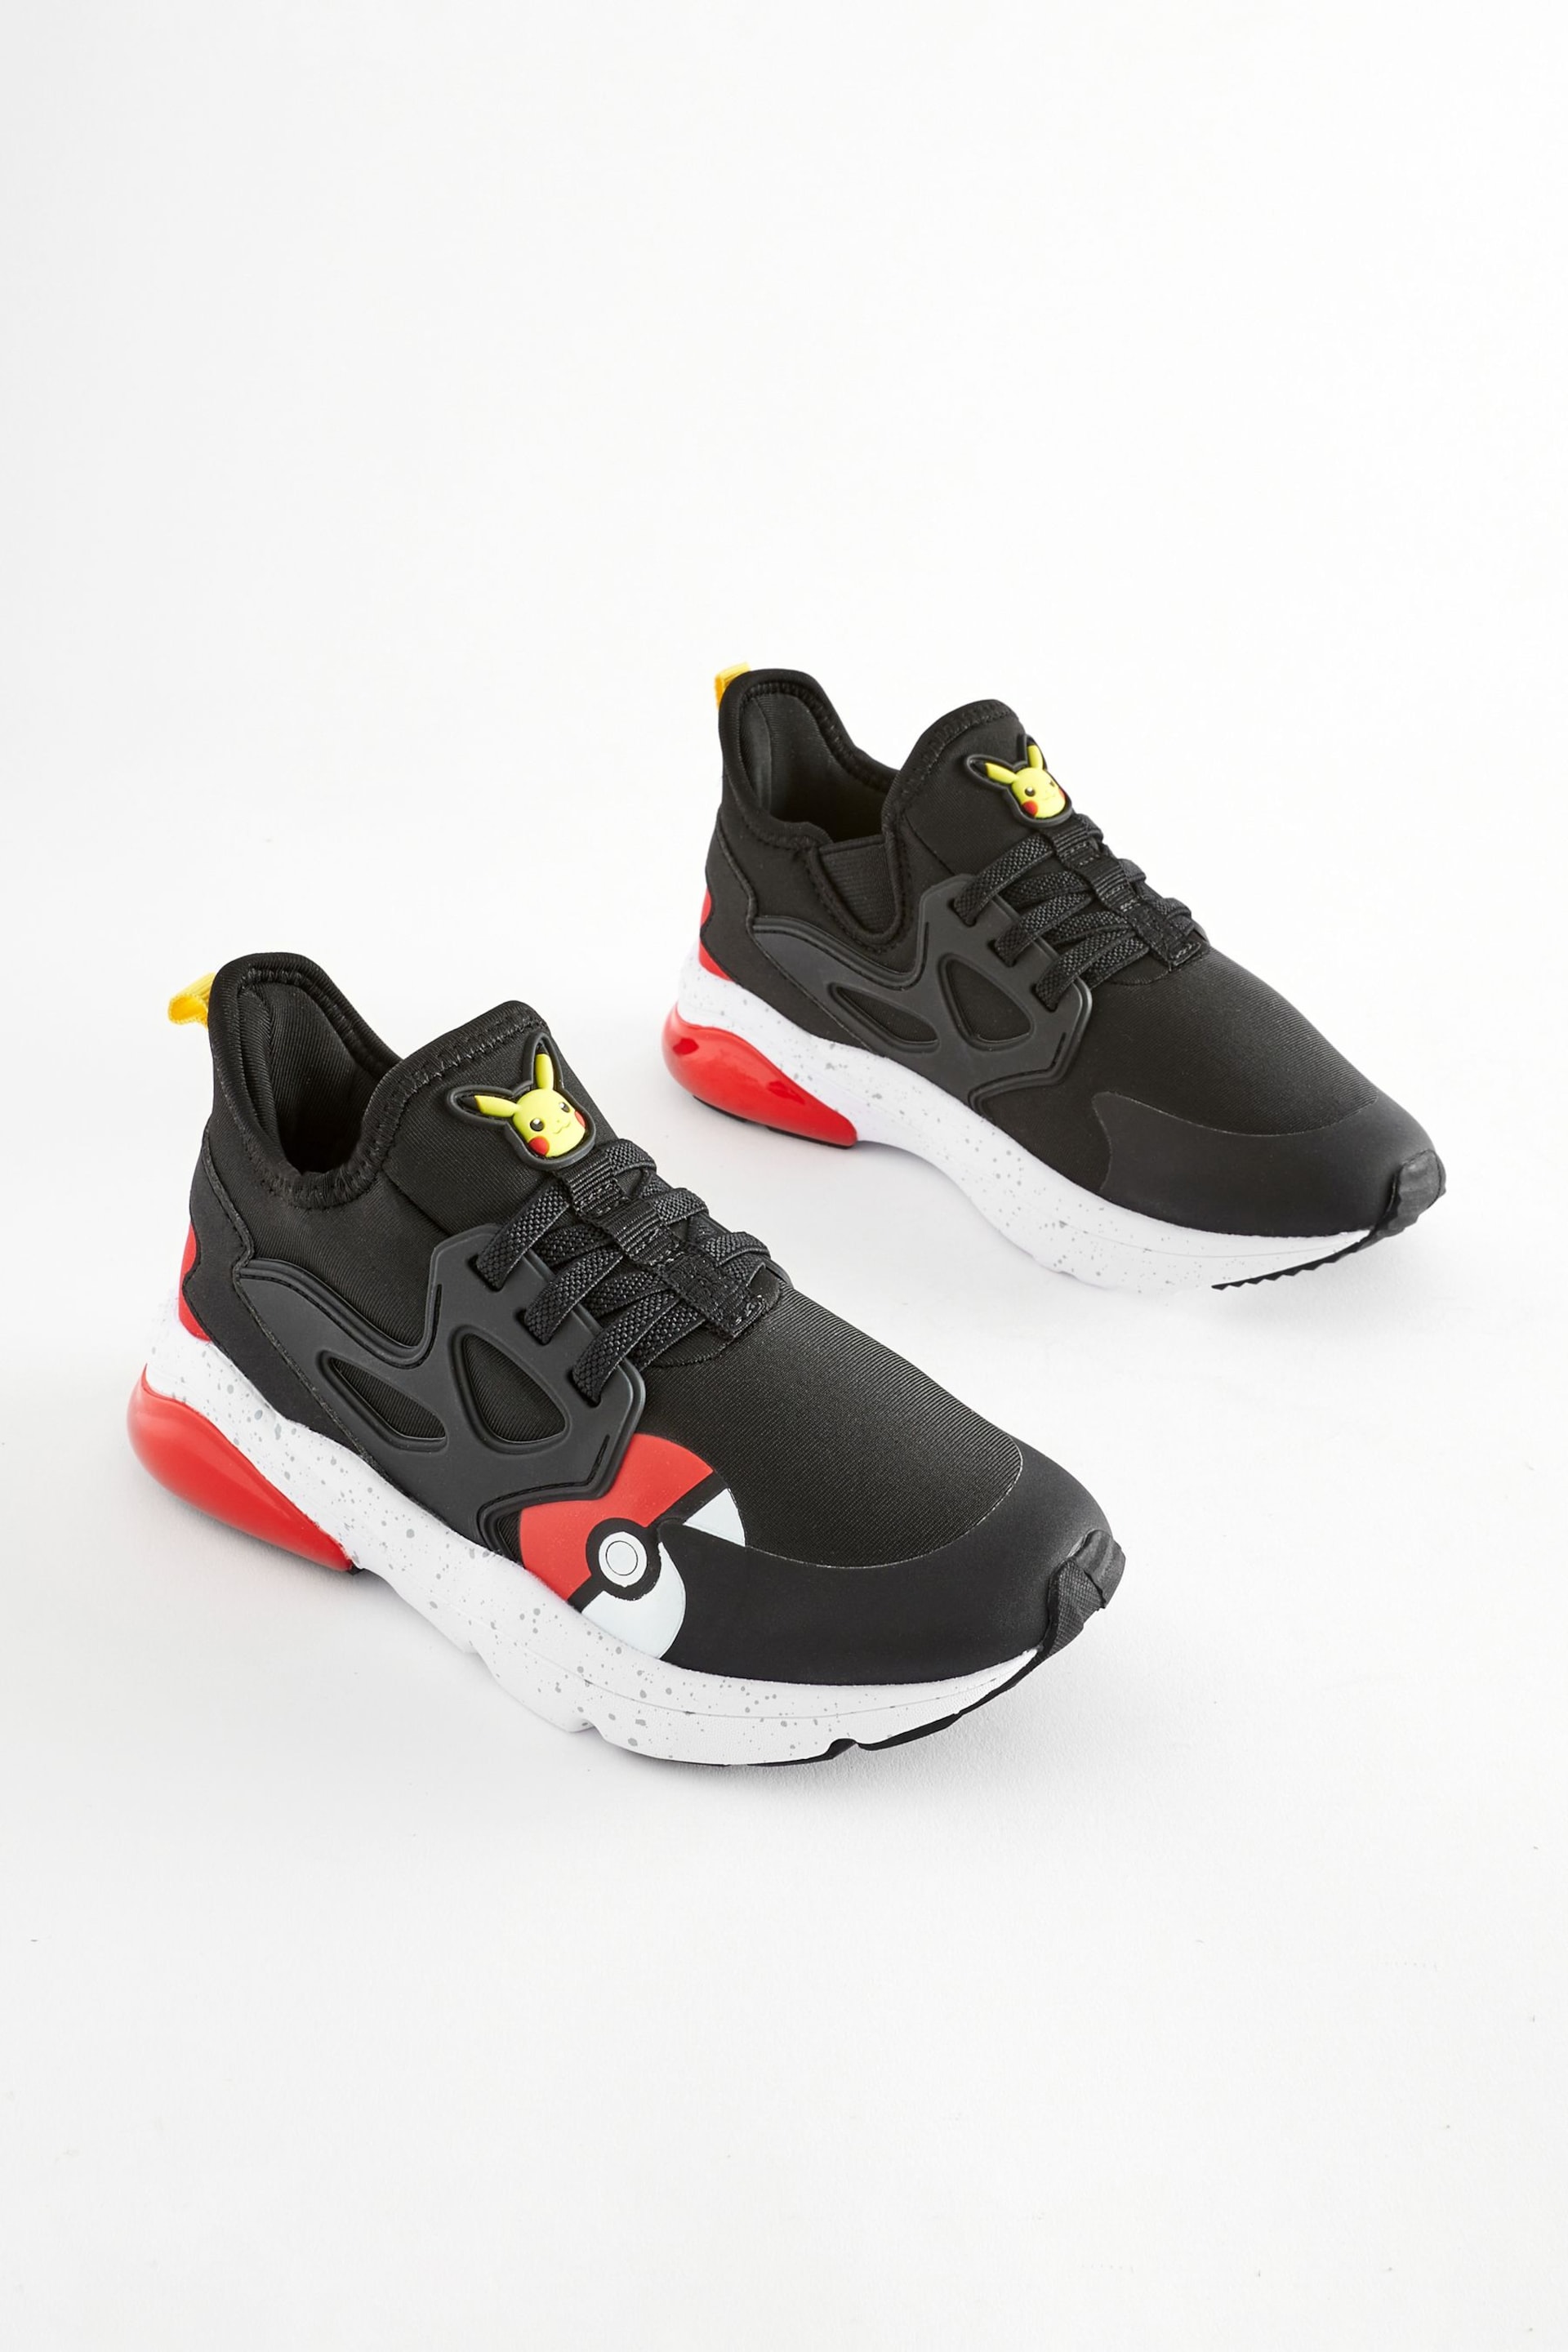 Black/Red Pokemon Elastic Lace Trainers - Image 4 of 6